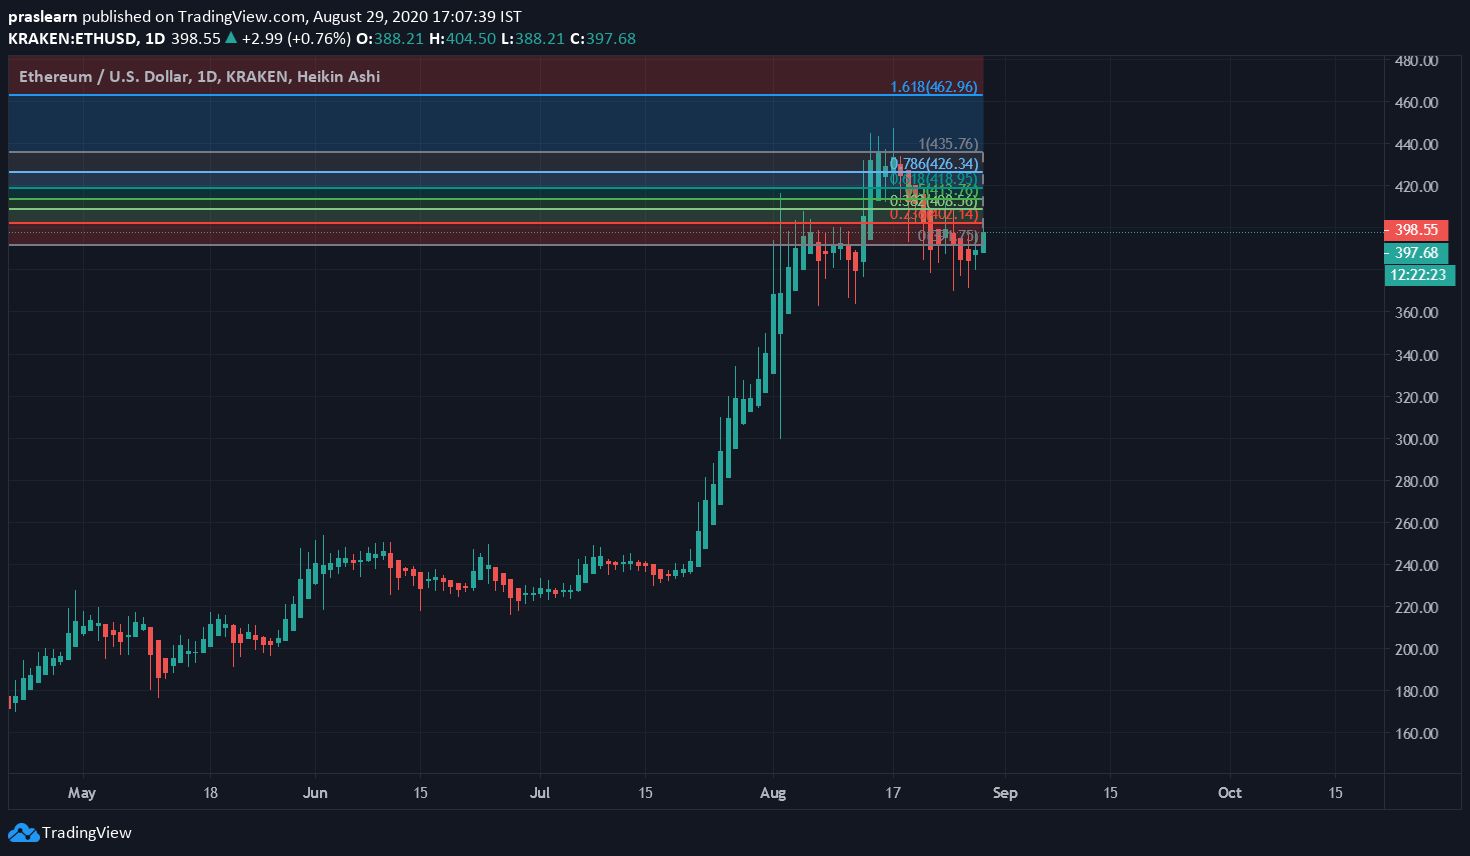 Ethereum Price Analysis of 1 Day: ETH/USD 1 Day Chart: Tradingview